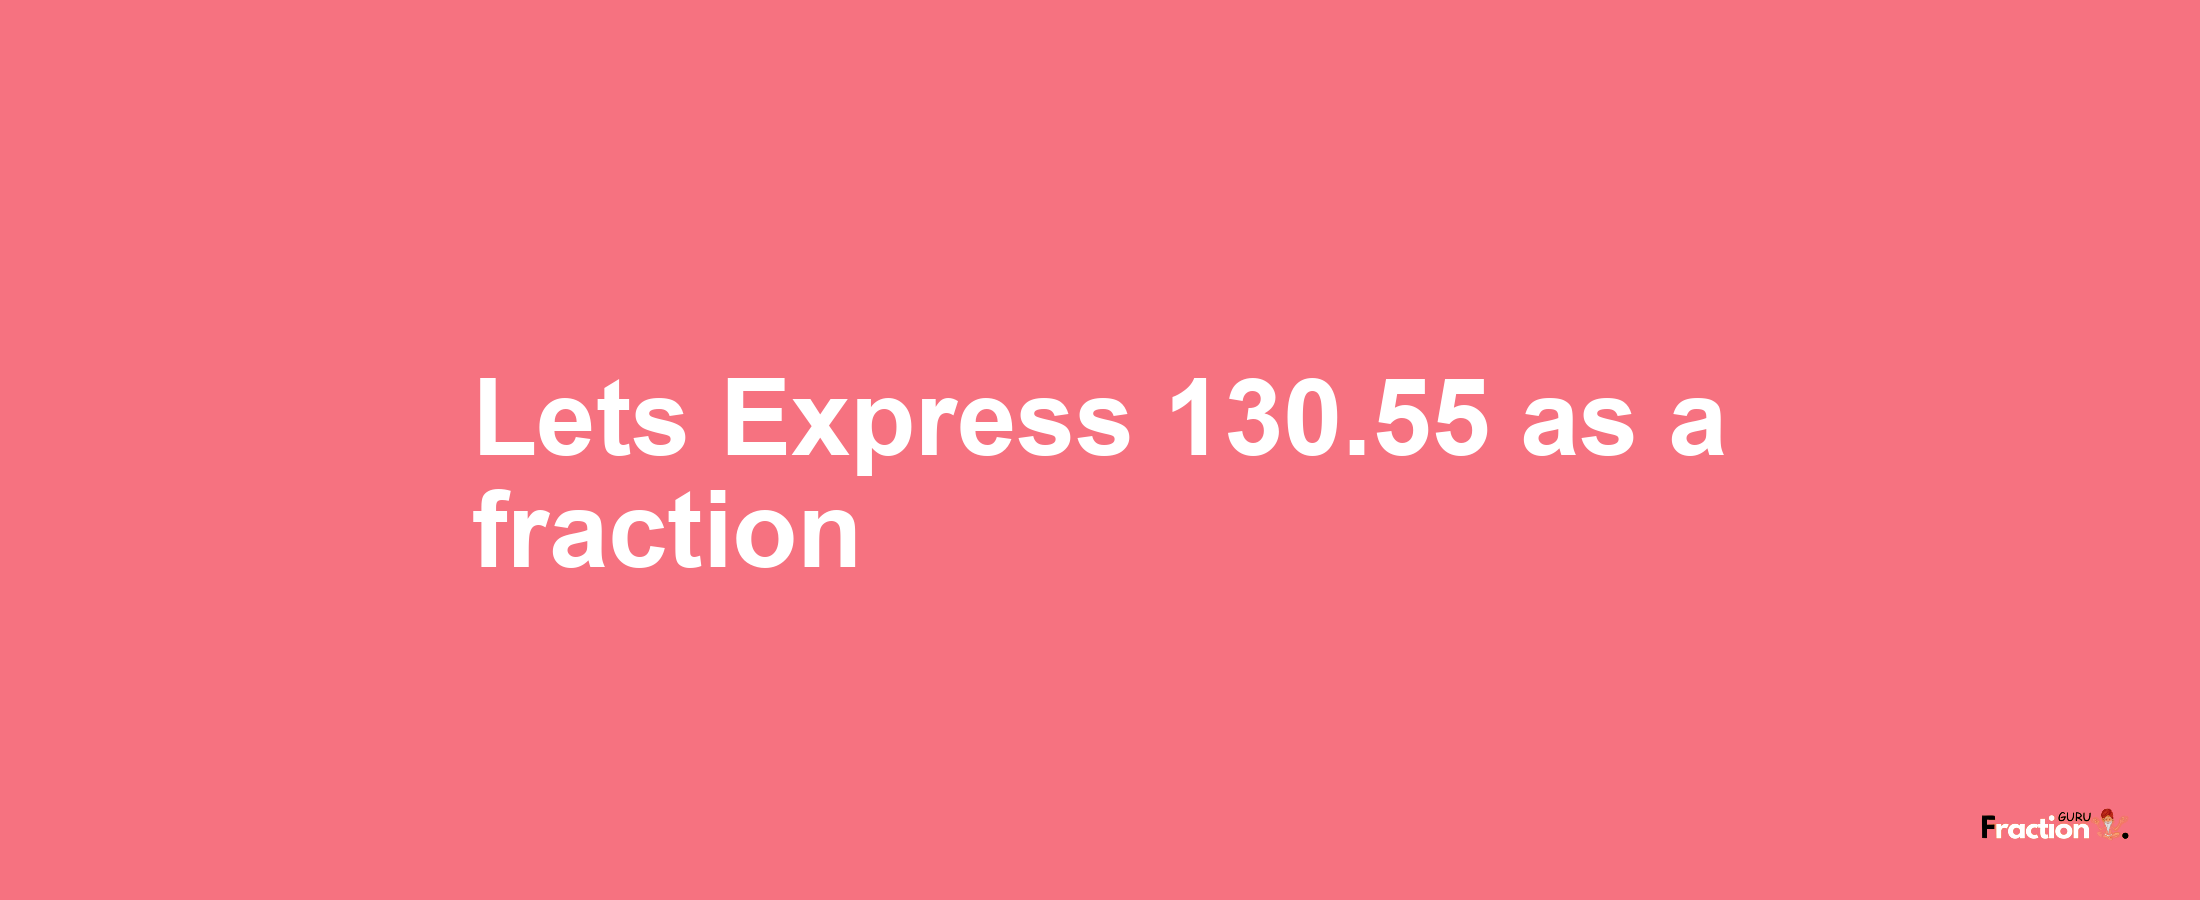 Lets Express 130.55 as afraction